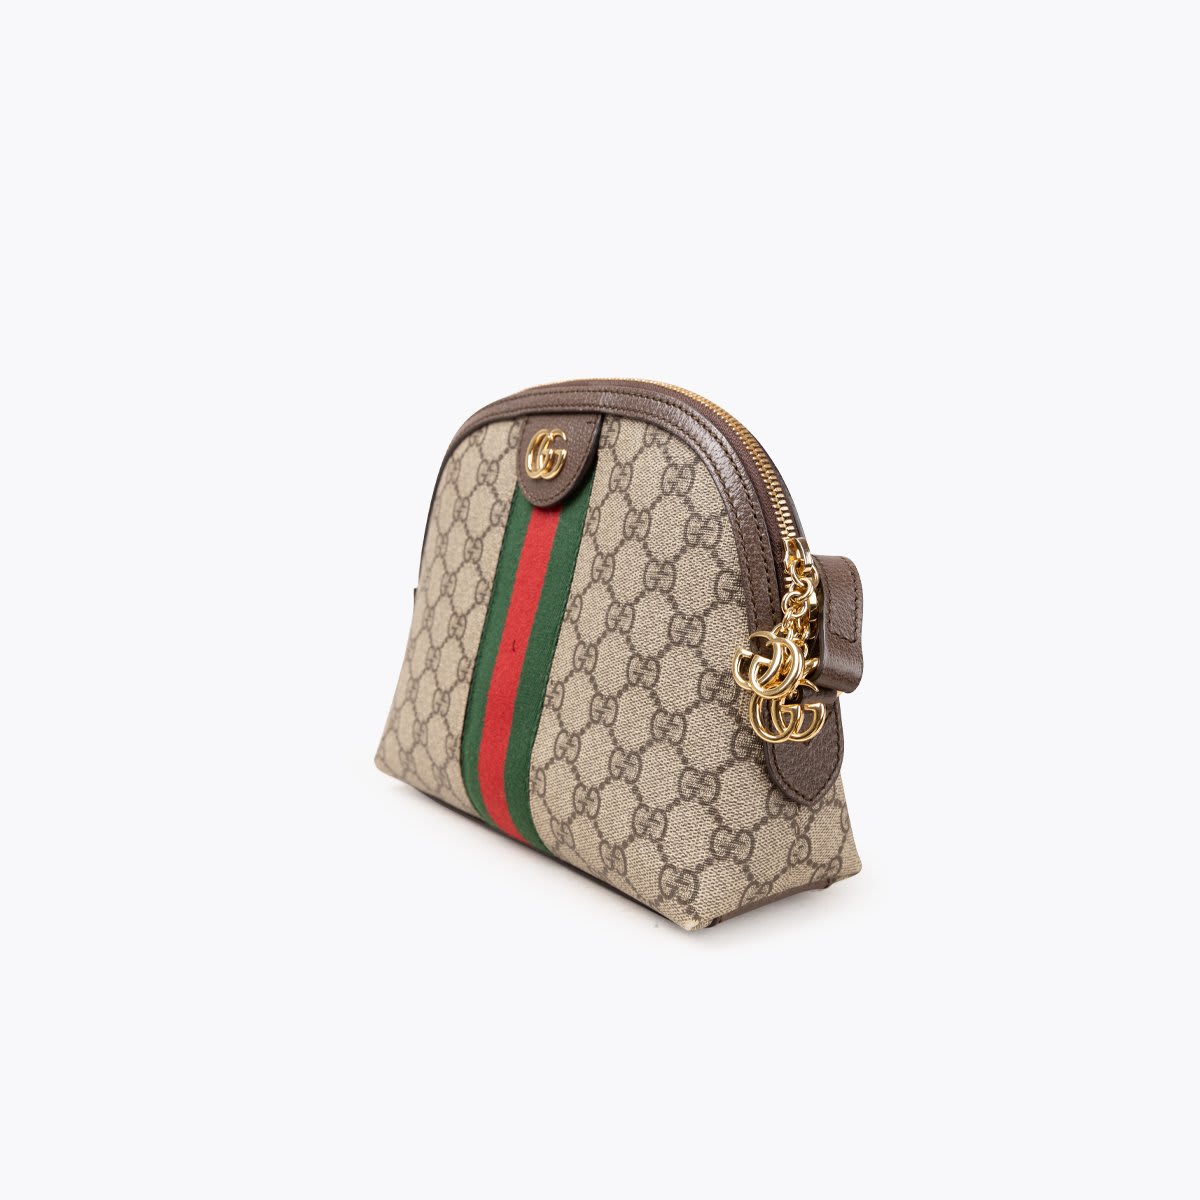 Gucci Ophidia Dome Bag